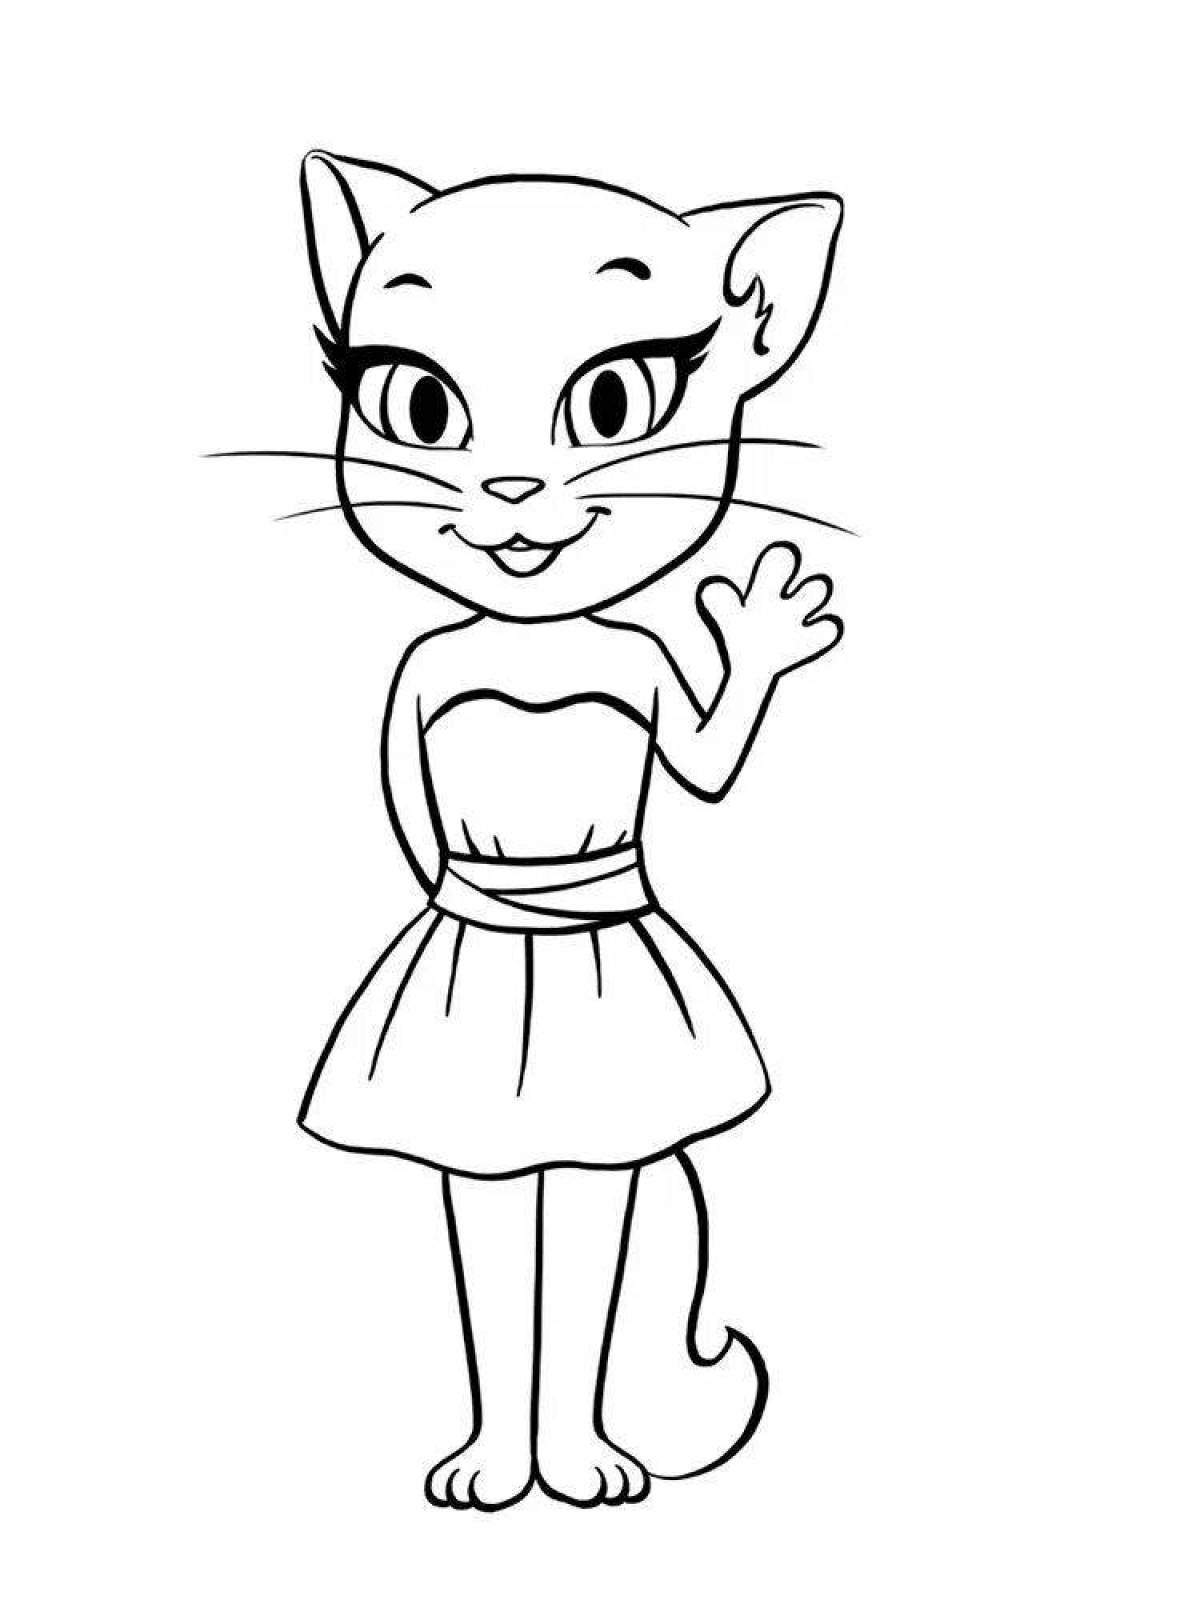 Blessed Angela Kitty coloring page